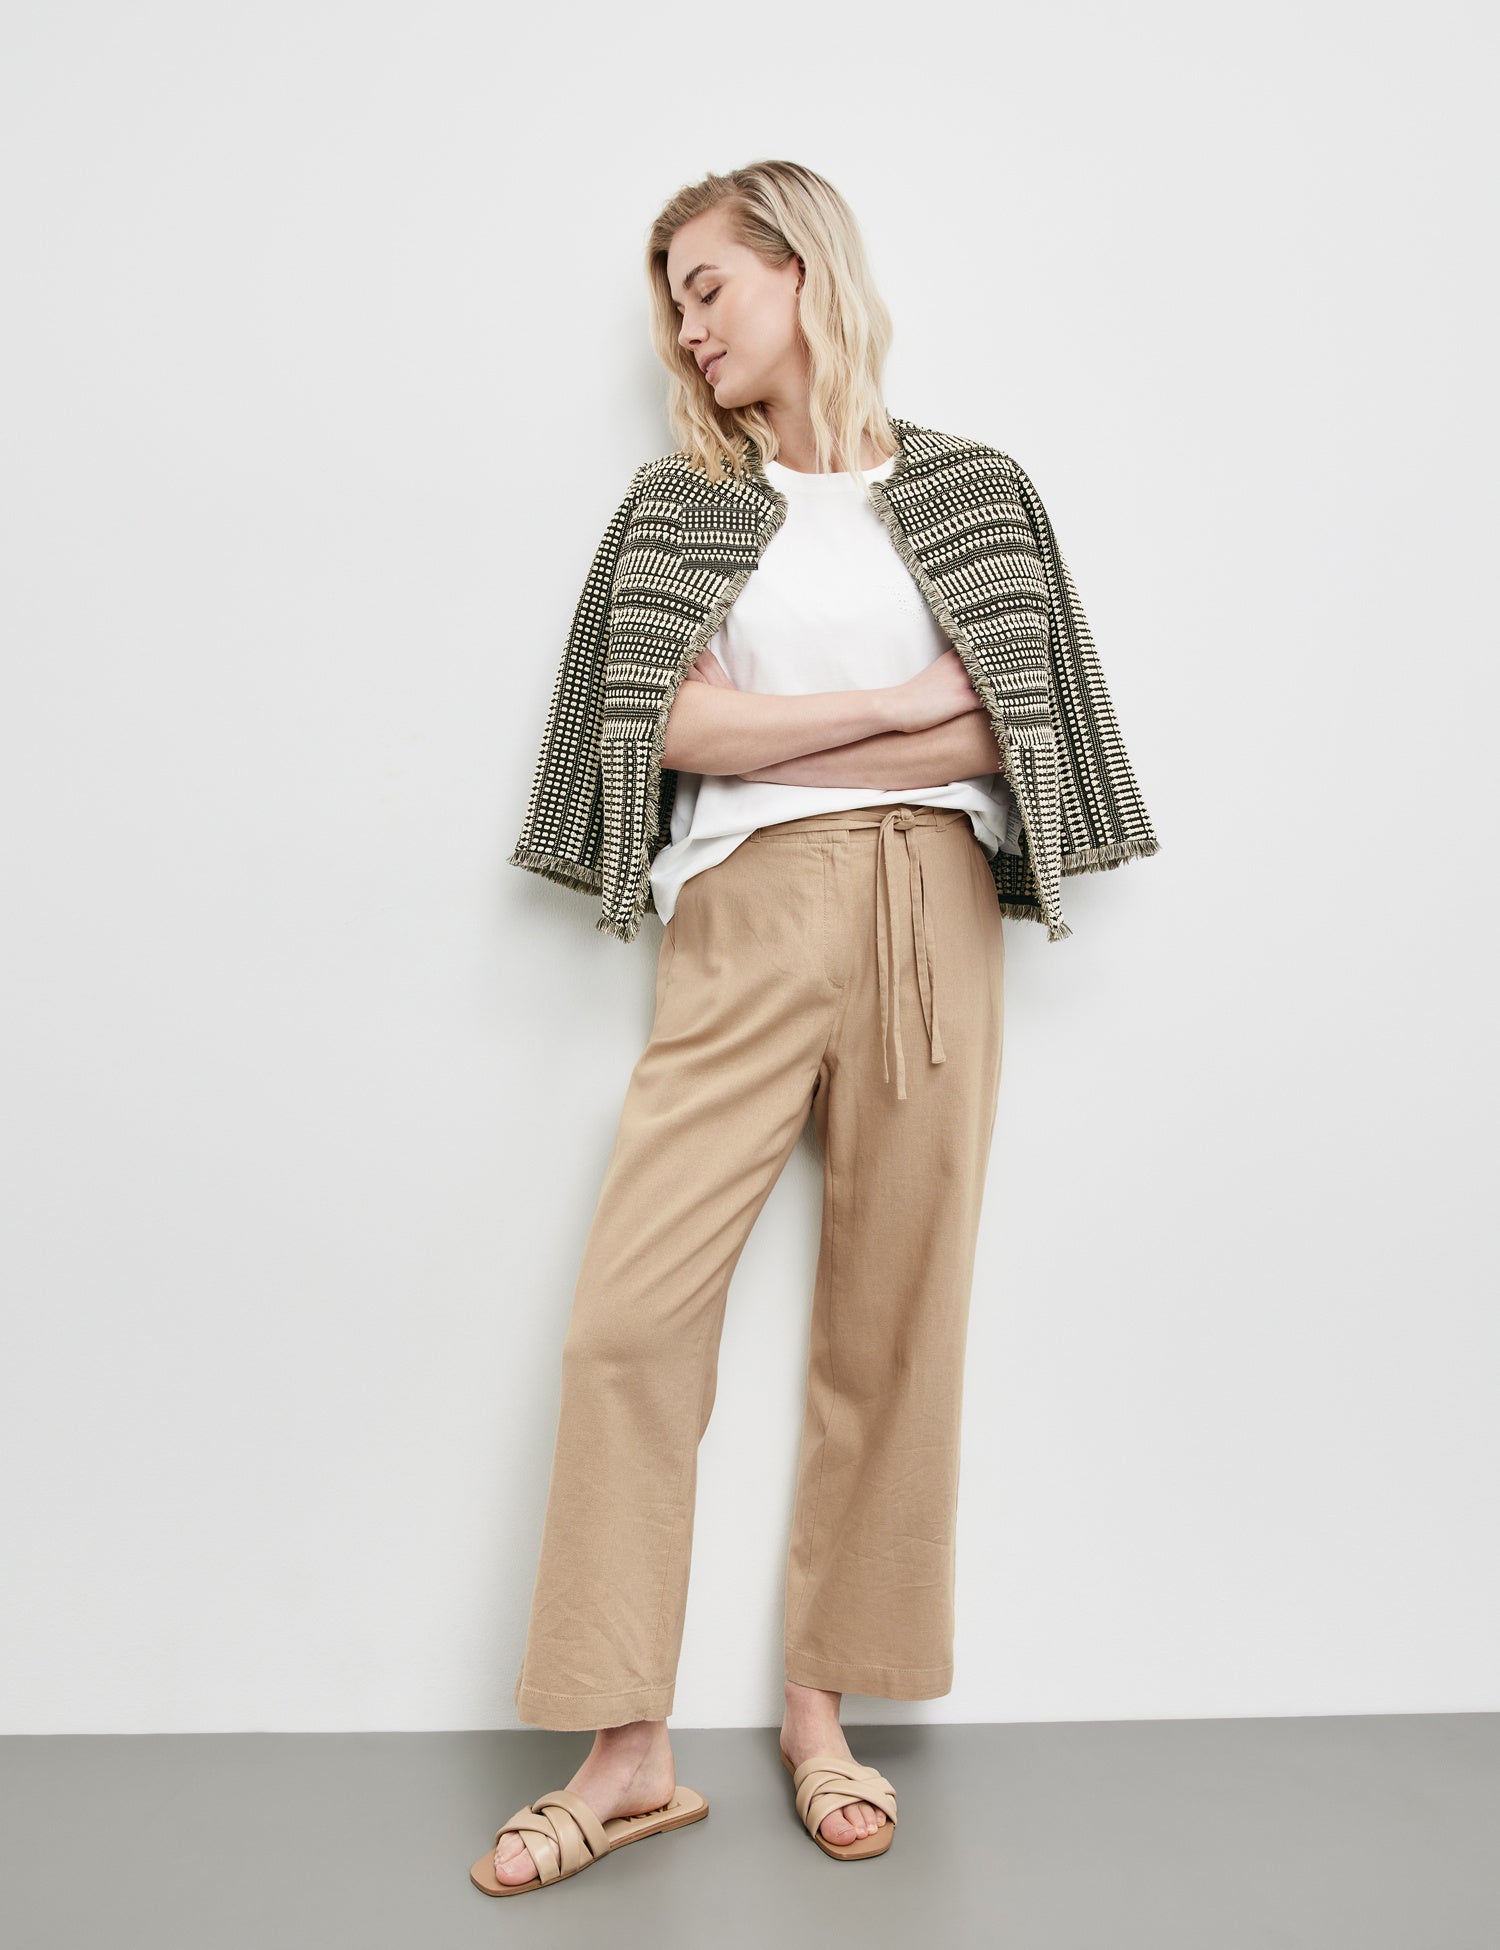 Linen Blend Trousers With A 3/4-Length, Wide Leg